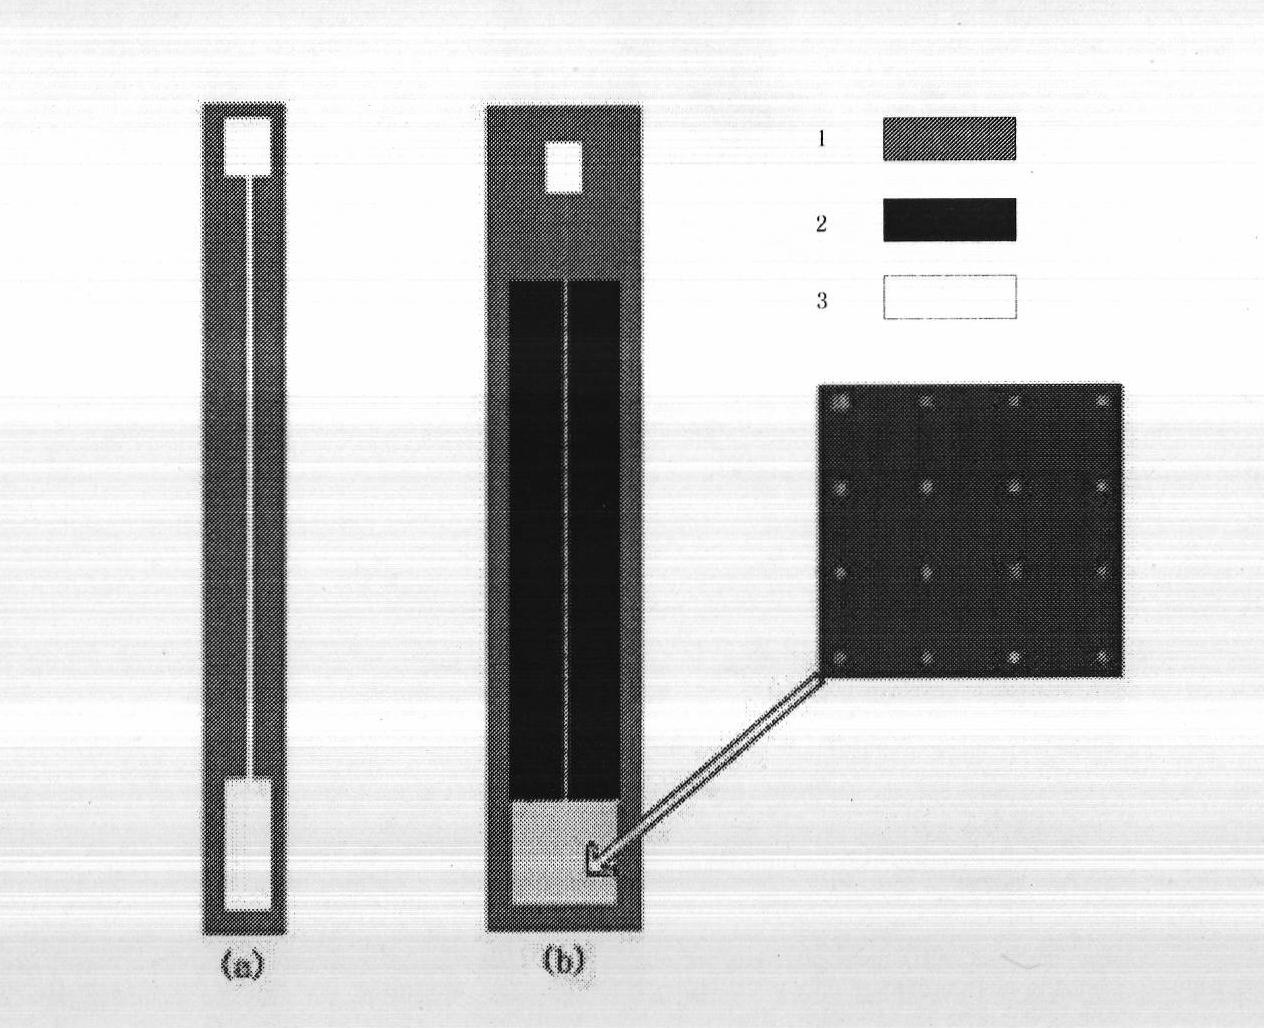 Production and detection method of plated bismuth gold micro-array electrode for detecting heavy metals